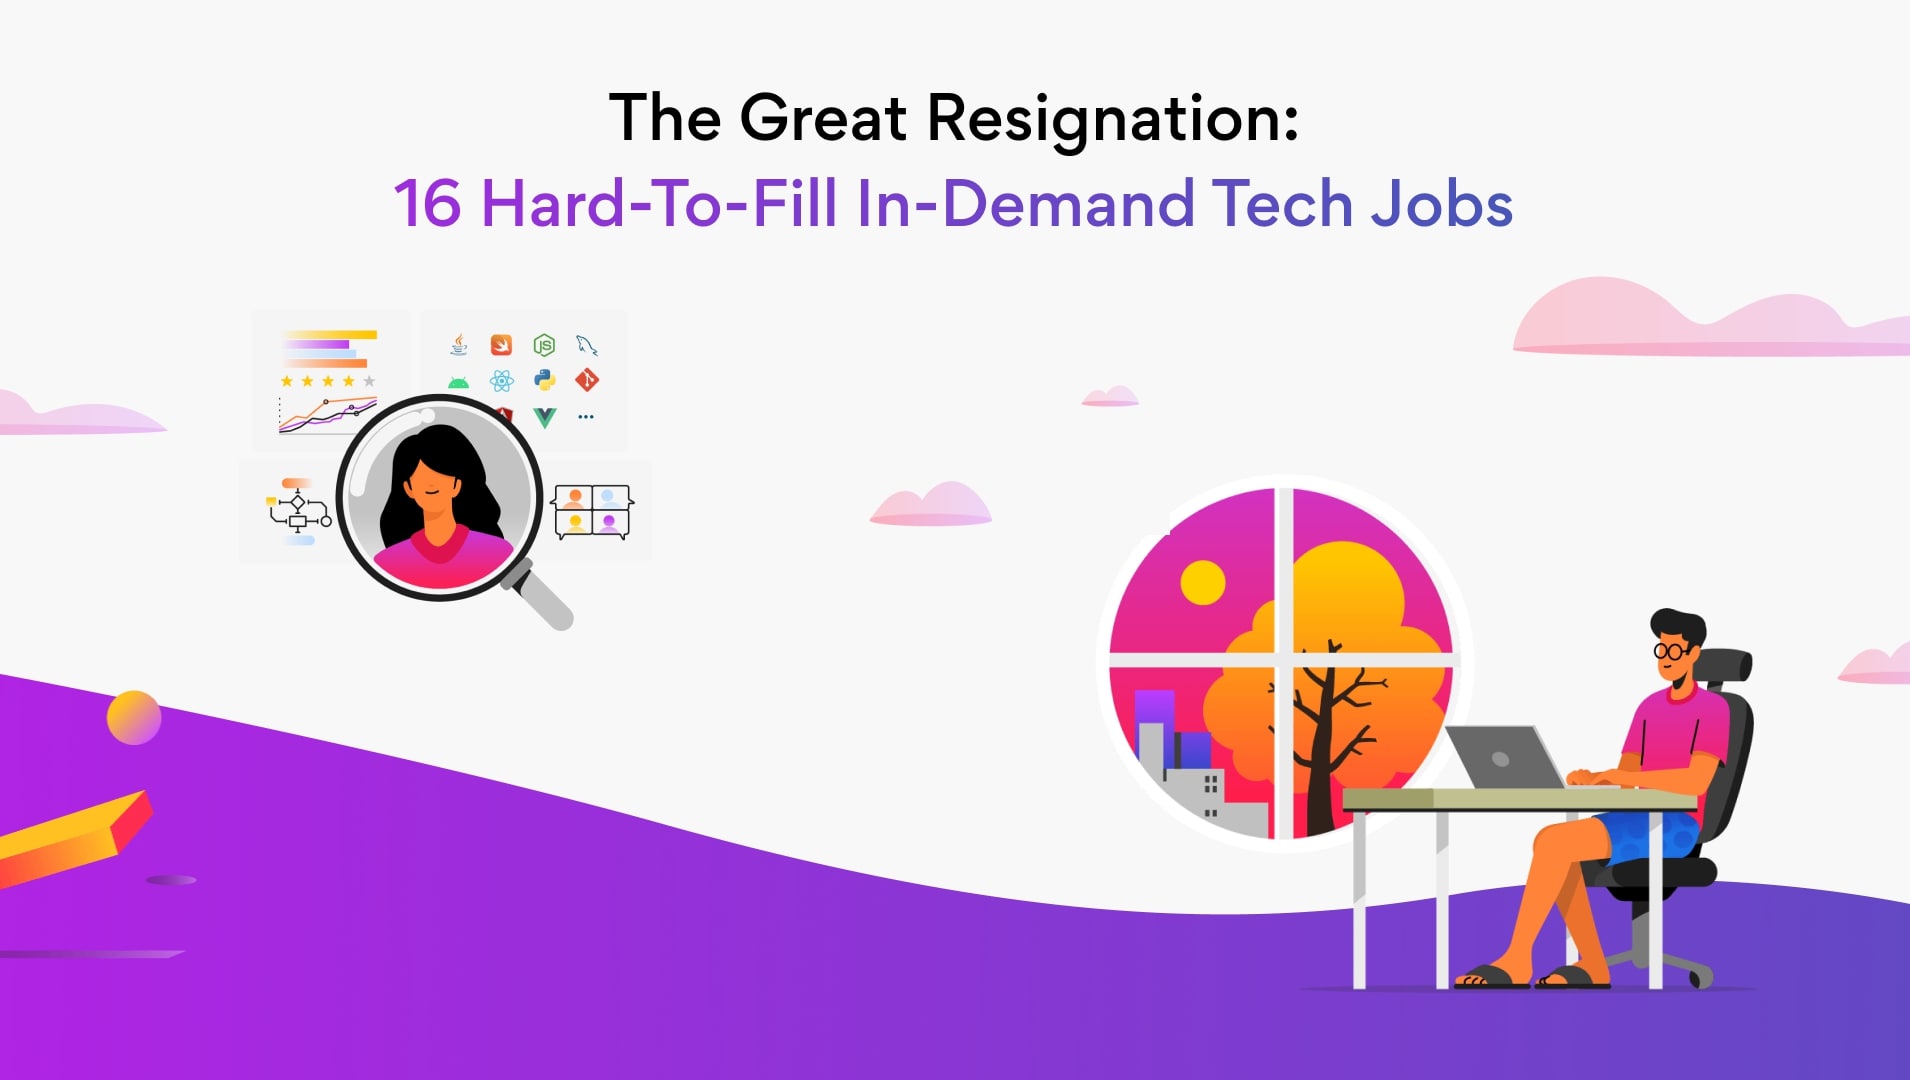 16 Most-In-Demand Tech Jobs in the Great Resignation